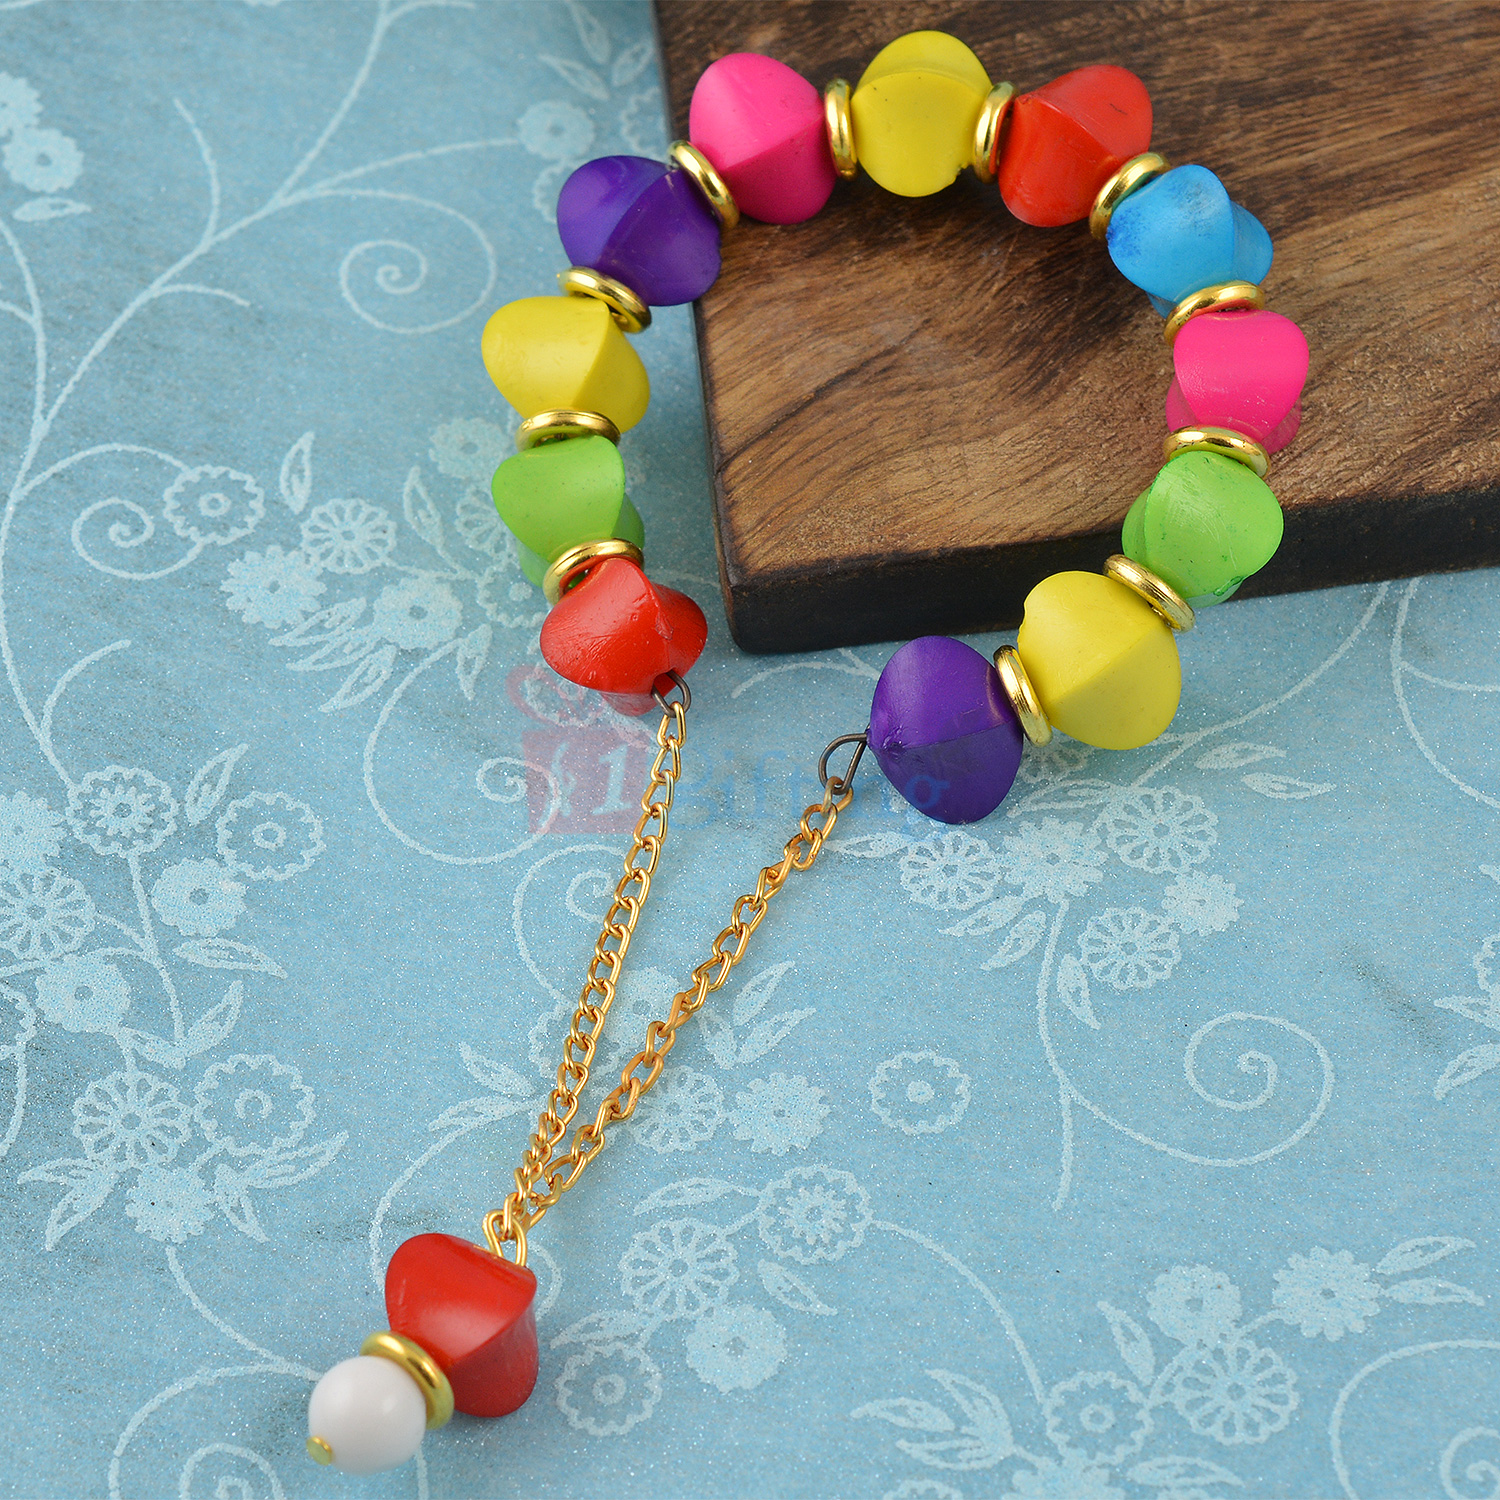 Golden Rings with Colorful Seed Looking Dangler Bracelet